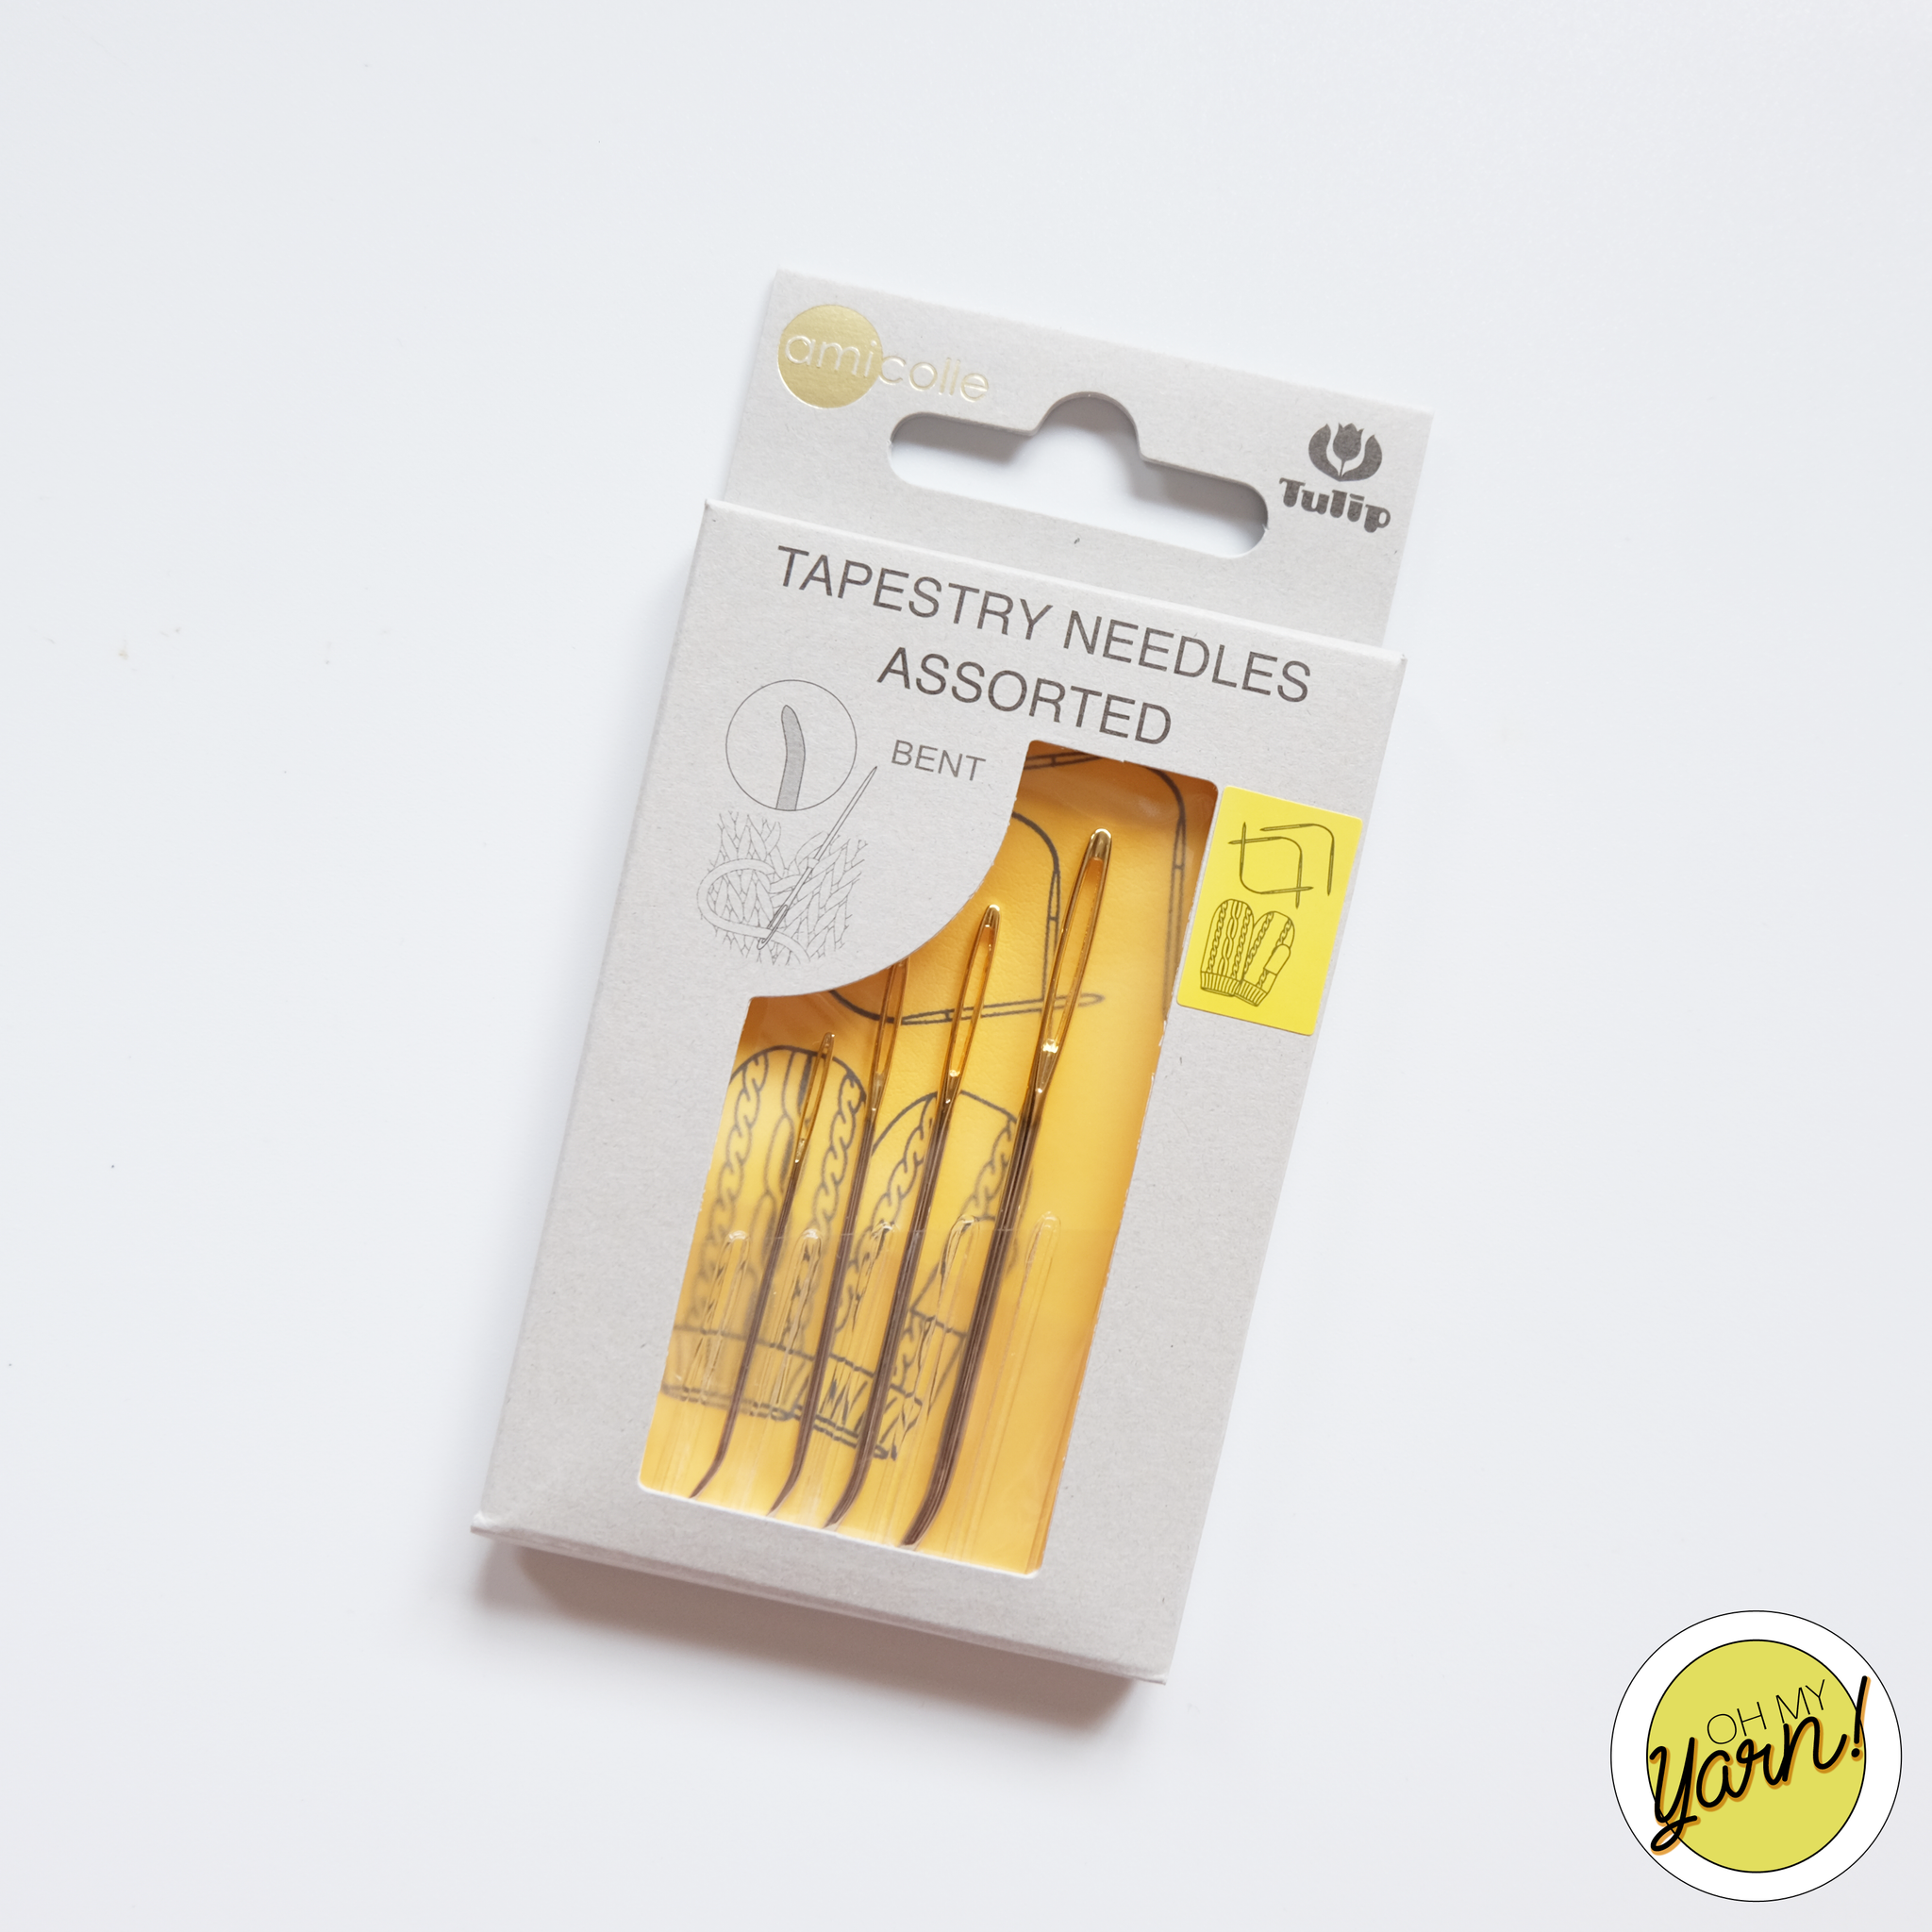 Tapestry Needles - Yarn Needles Assorted by Tulip